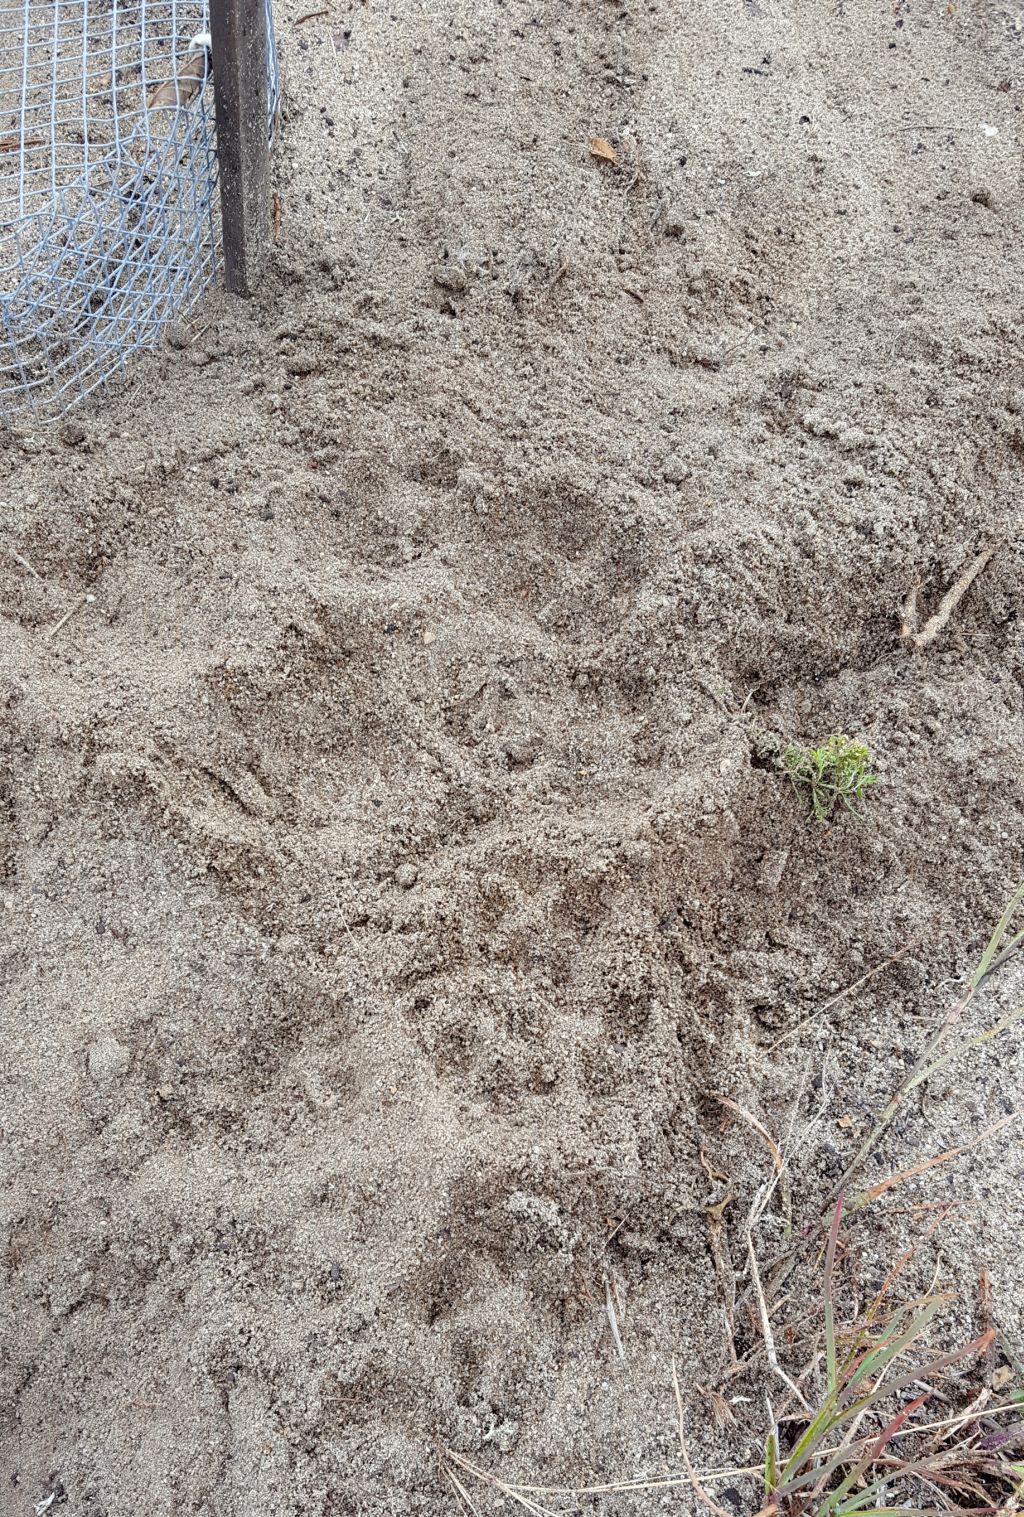 Fox tracks next to a protected nest in a turtle garden